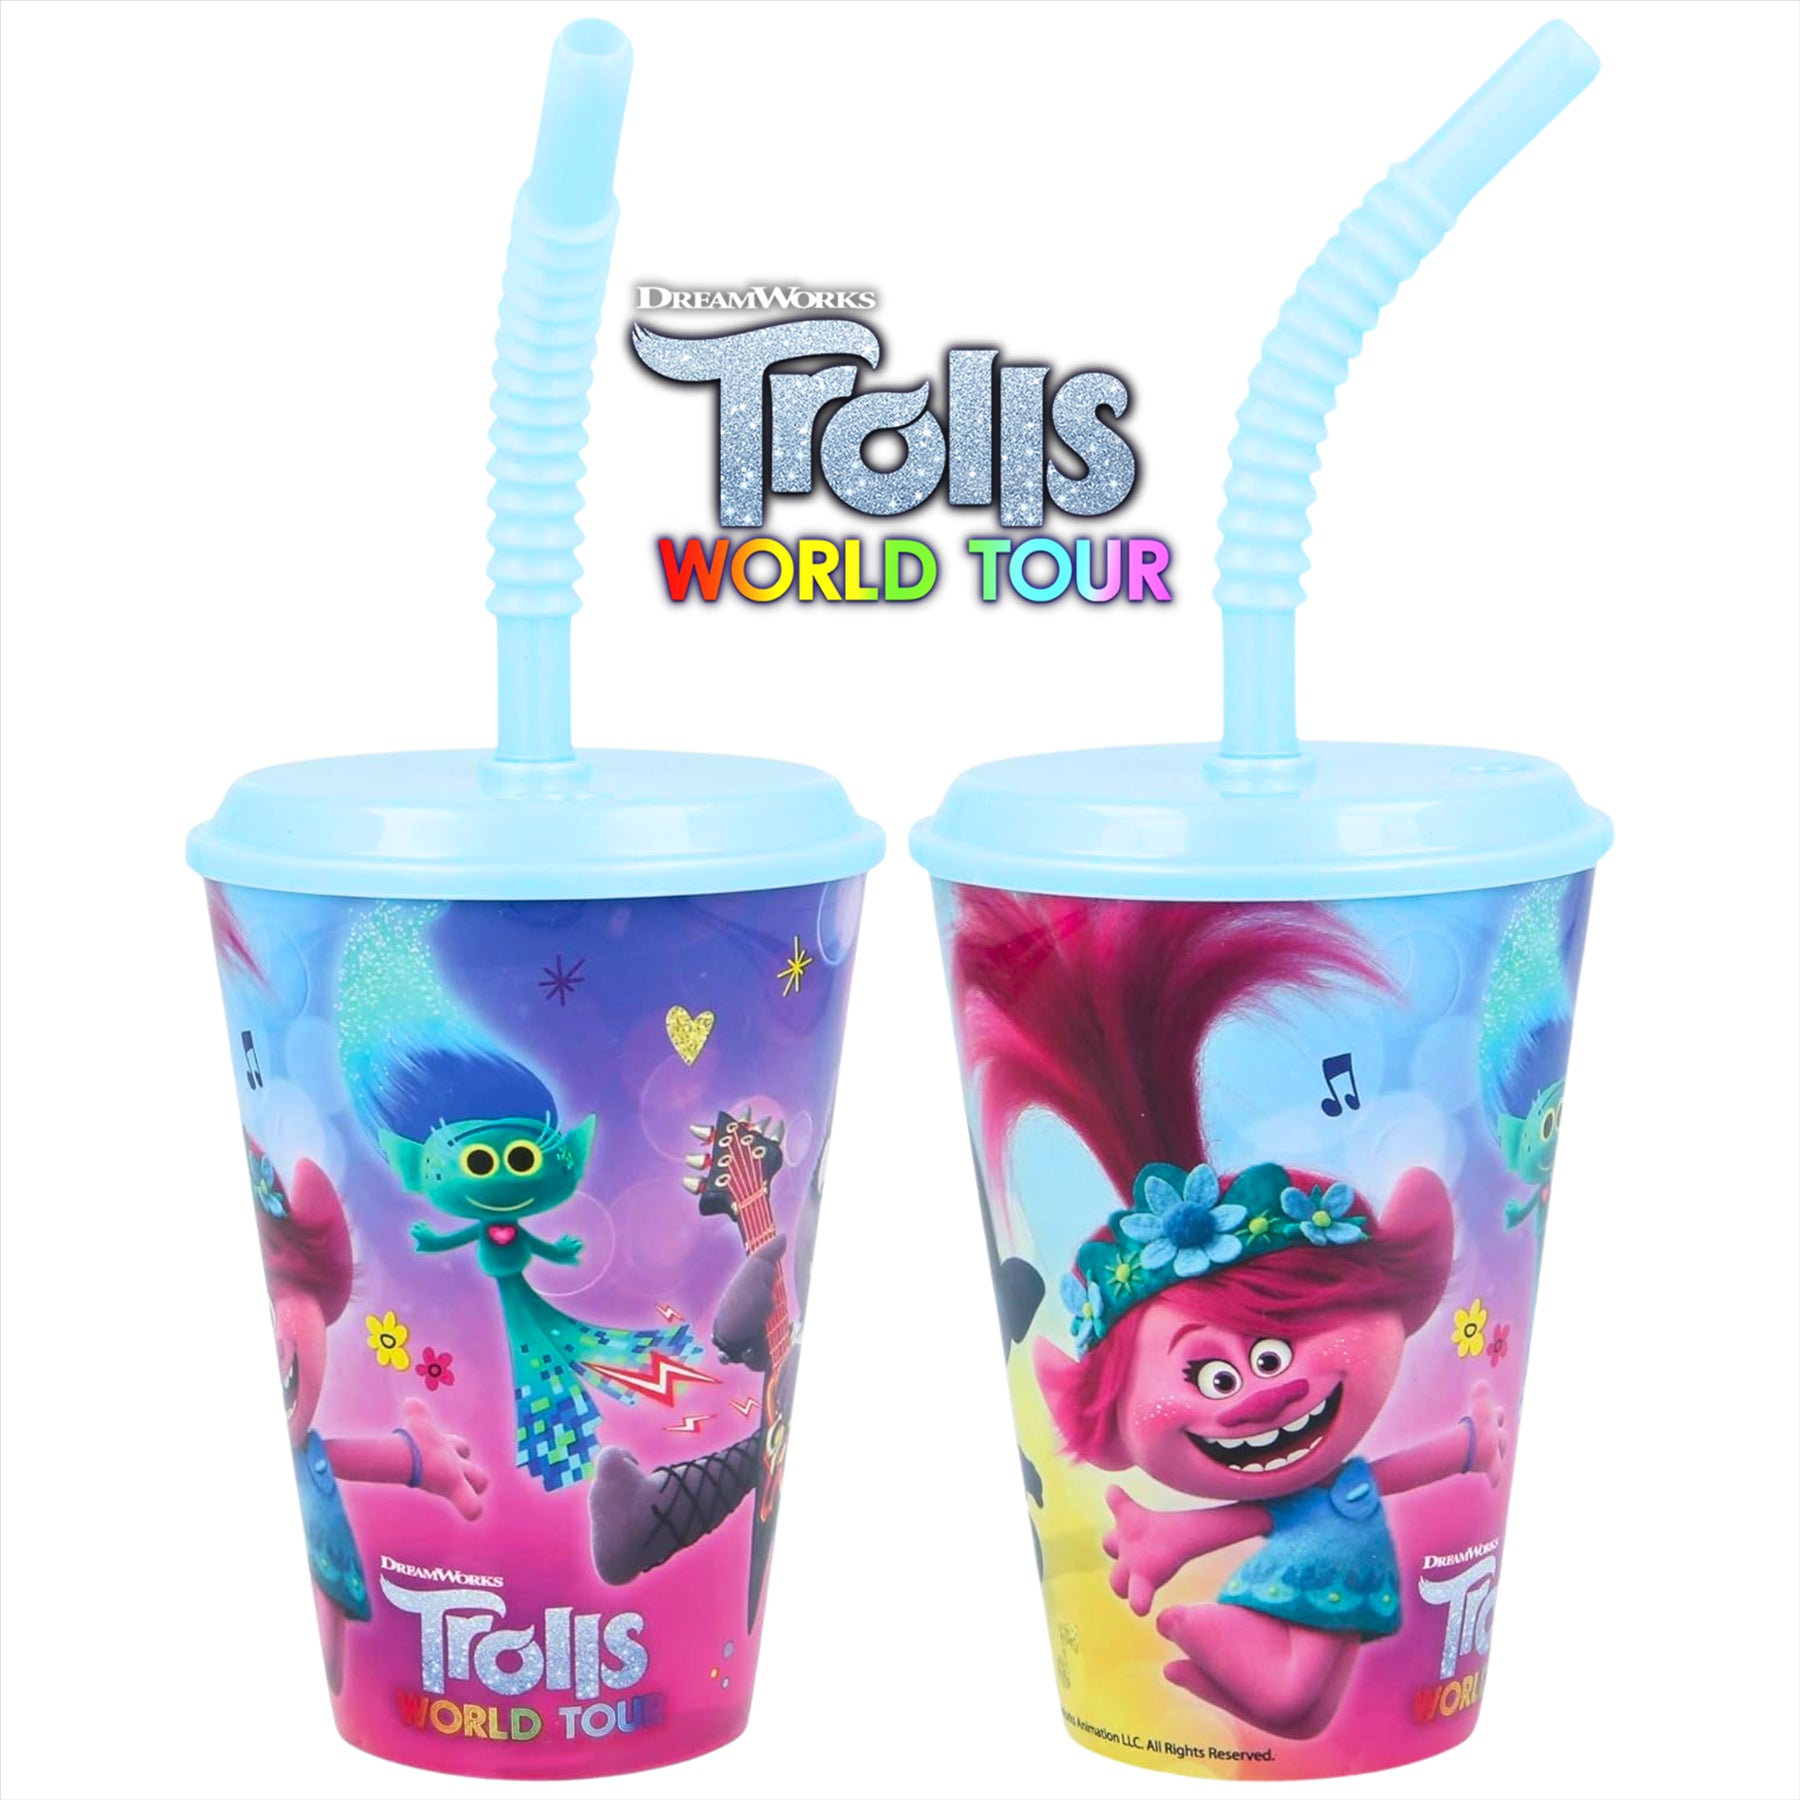 Trolls World Tour Plastic Cup with Straw - 430ml Drinking Cup Tumbler with Lid